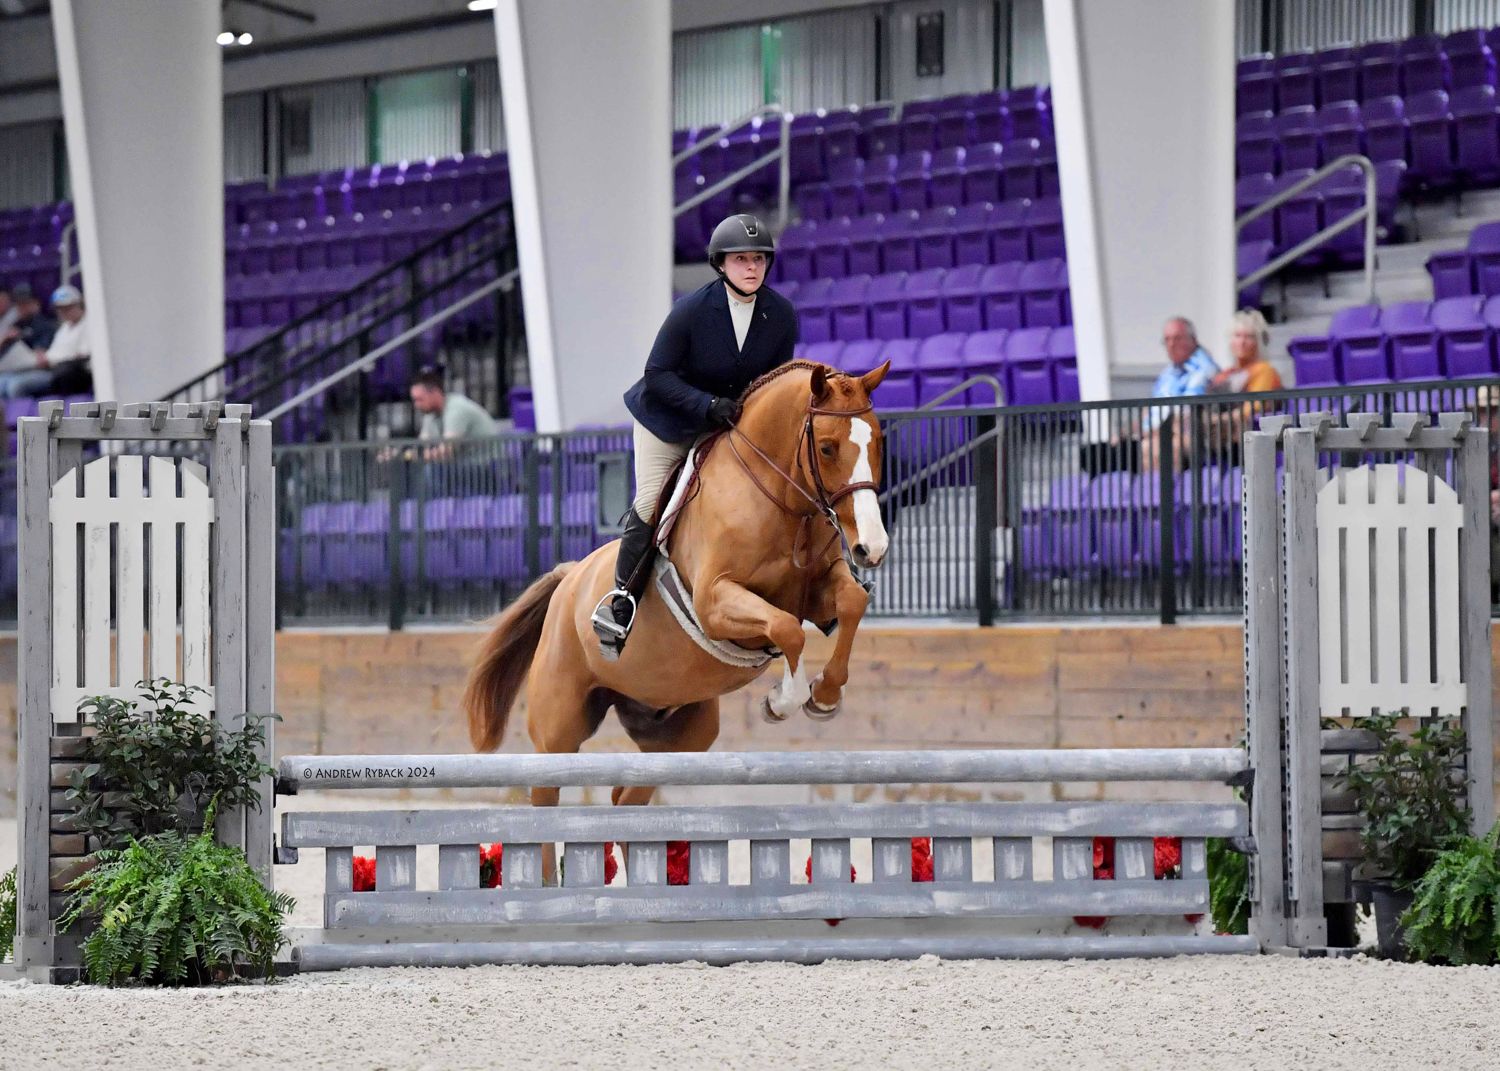 Maria jumping Porkchop at the World Equestrian Center in Florida